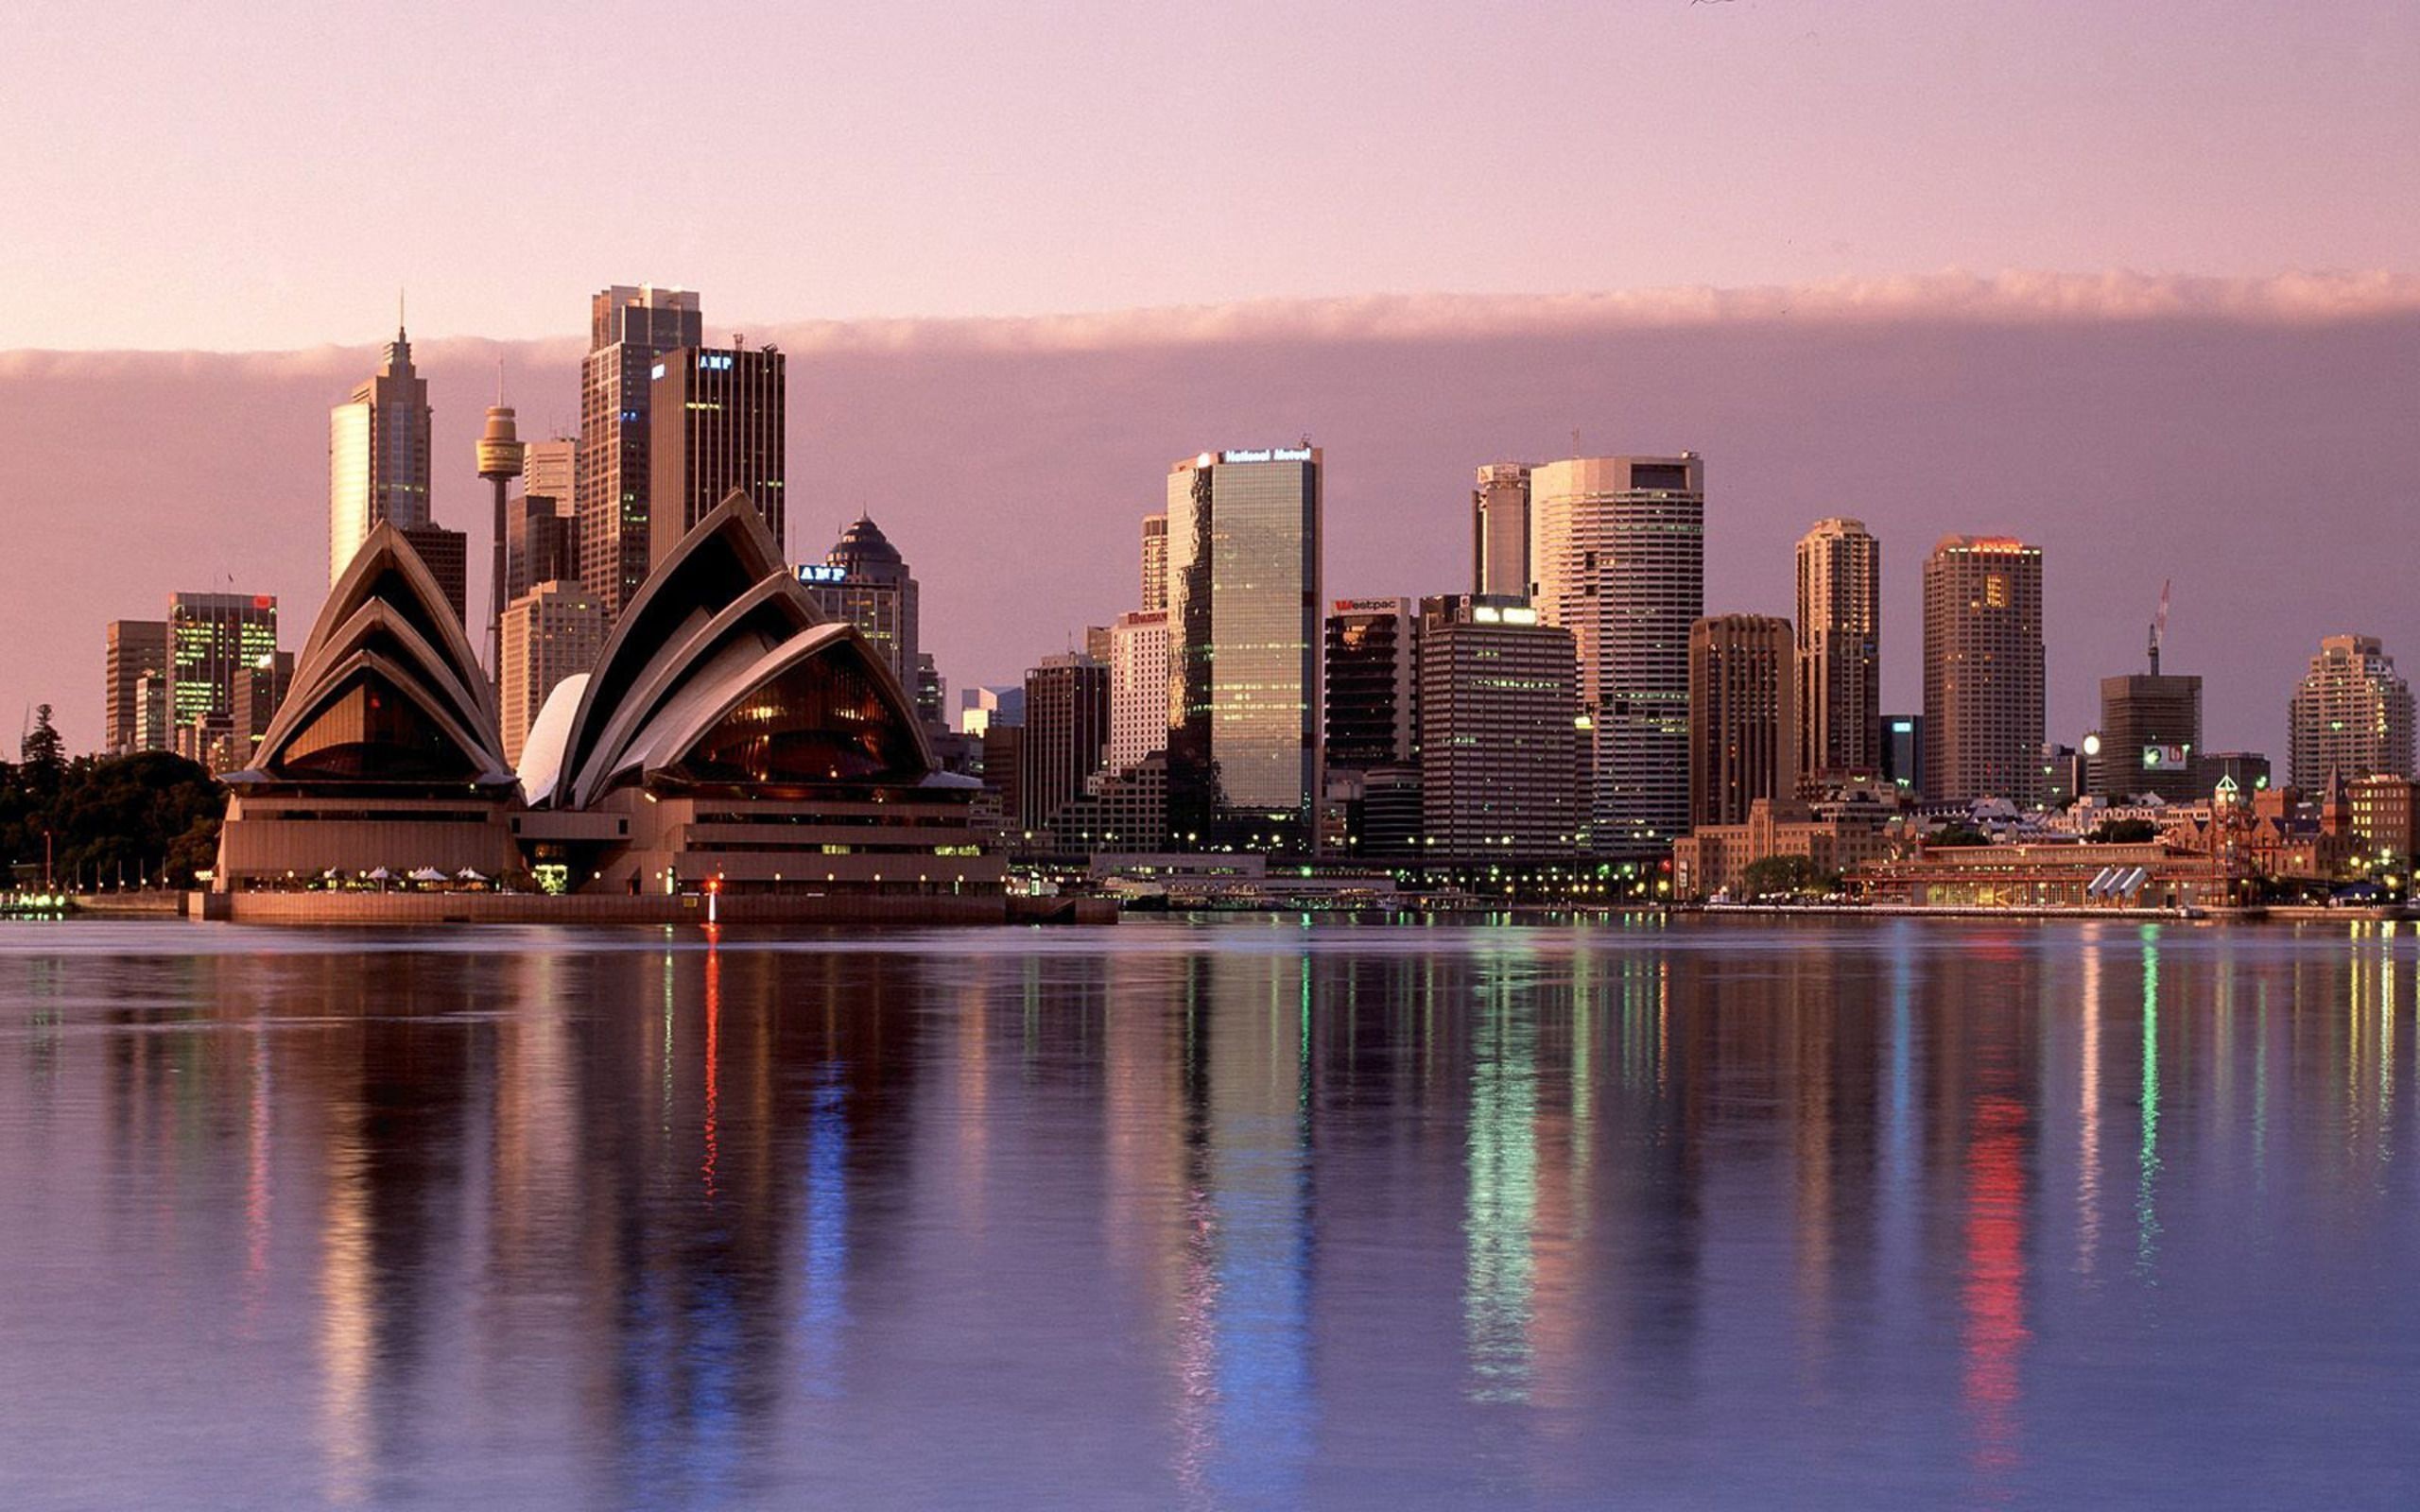 Sydney: The largest city in Australia with a population of over 5 million people. 2560x1600 HD Background.